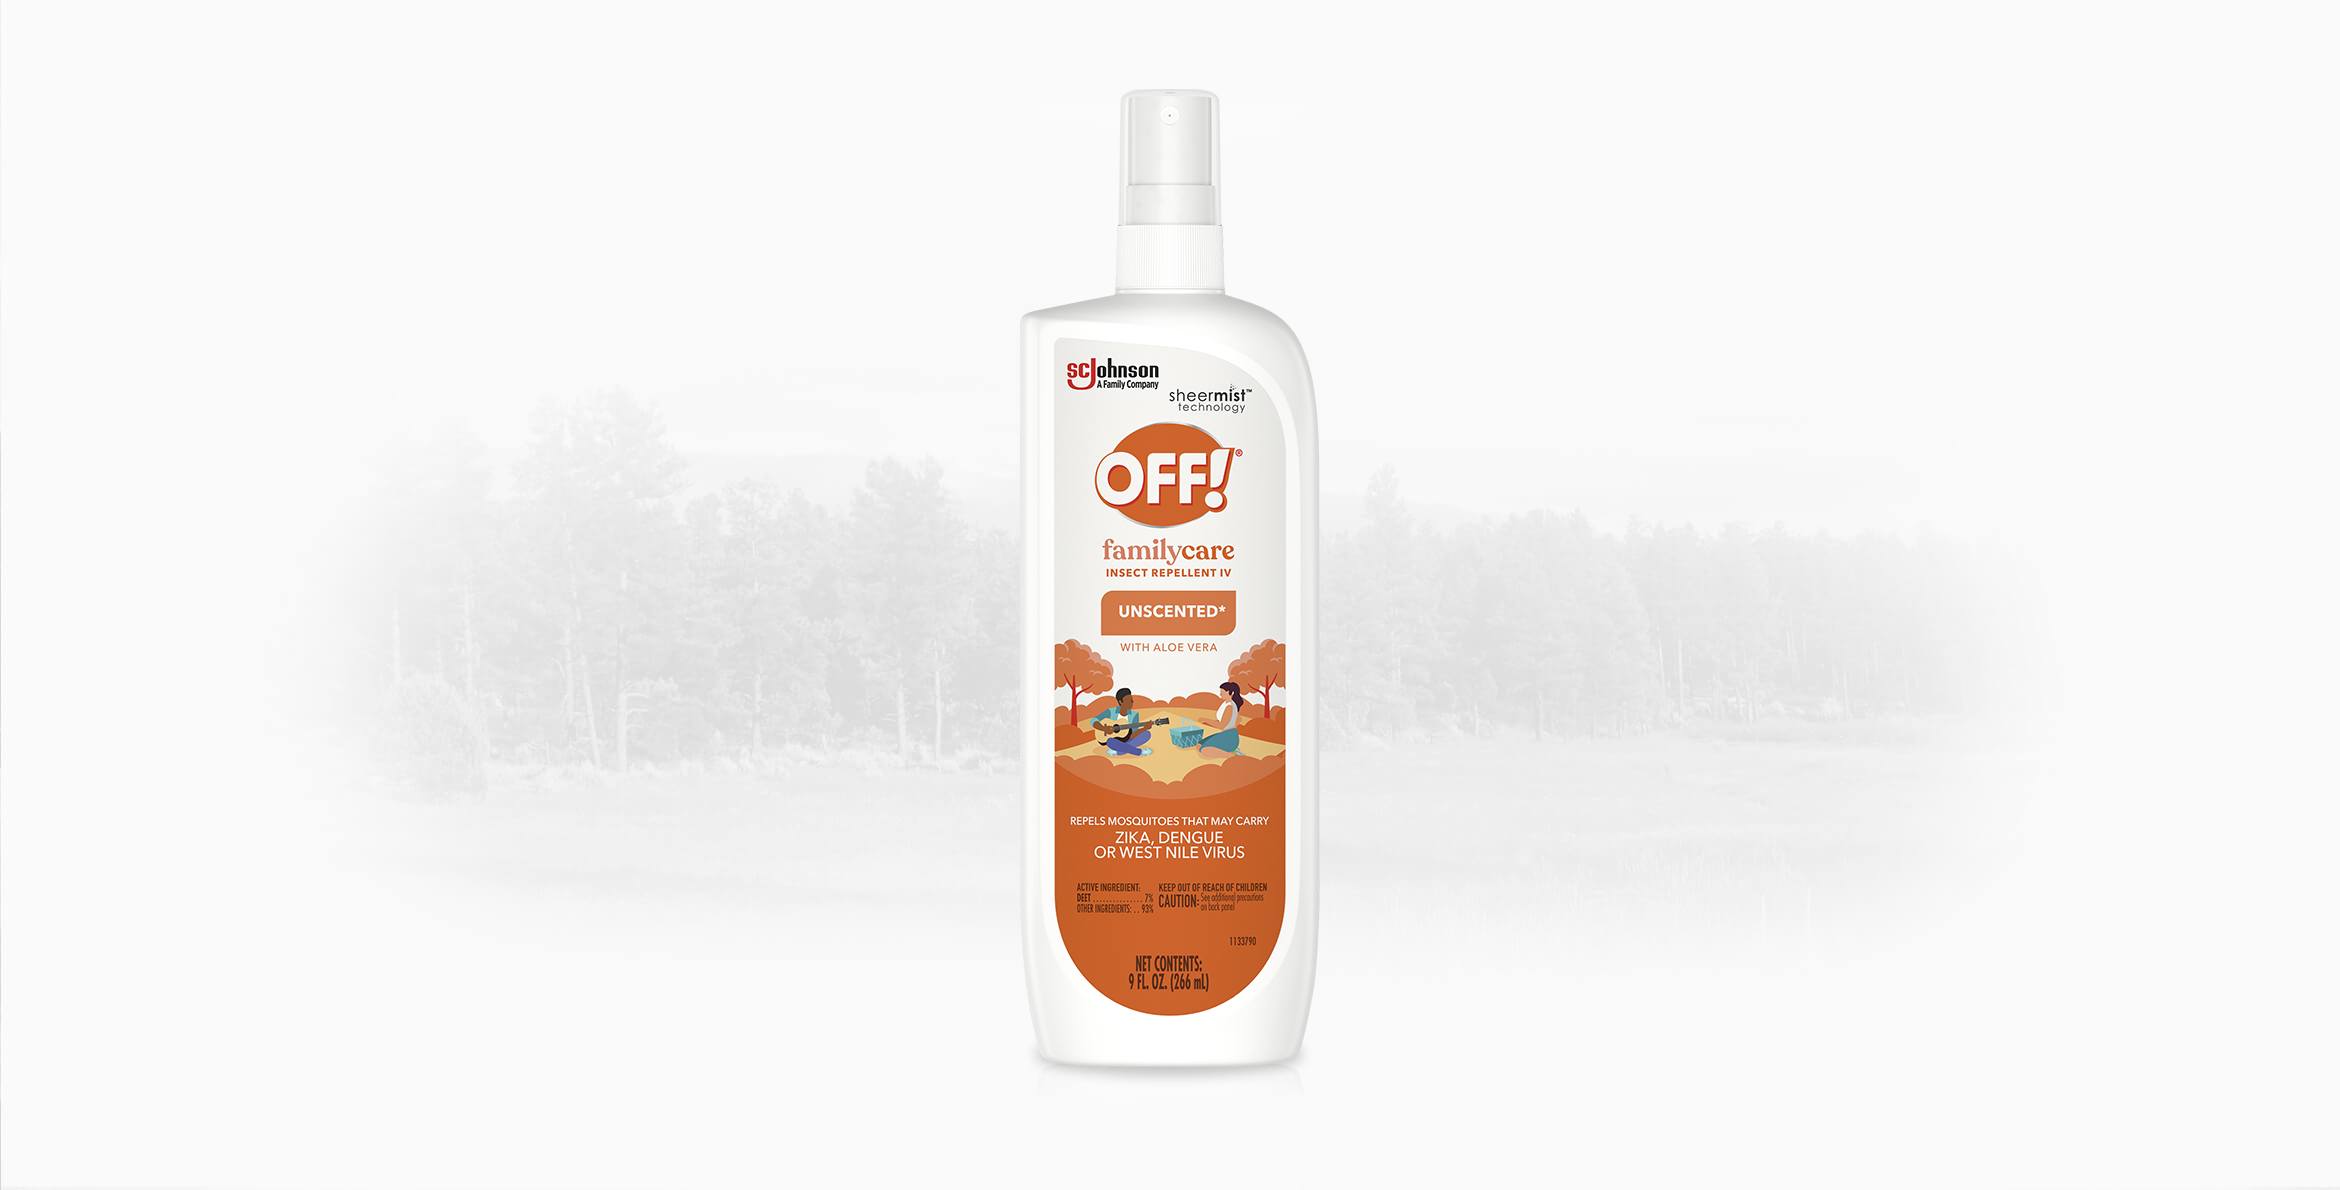 OFF!® FamilyCare Insect Repellent IV (Unscented)